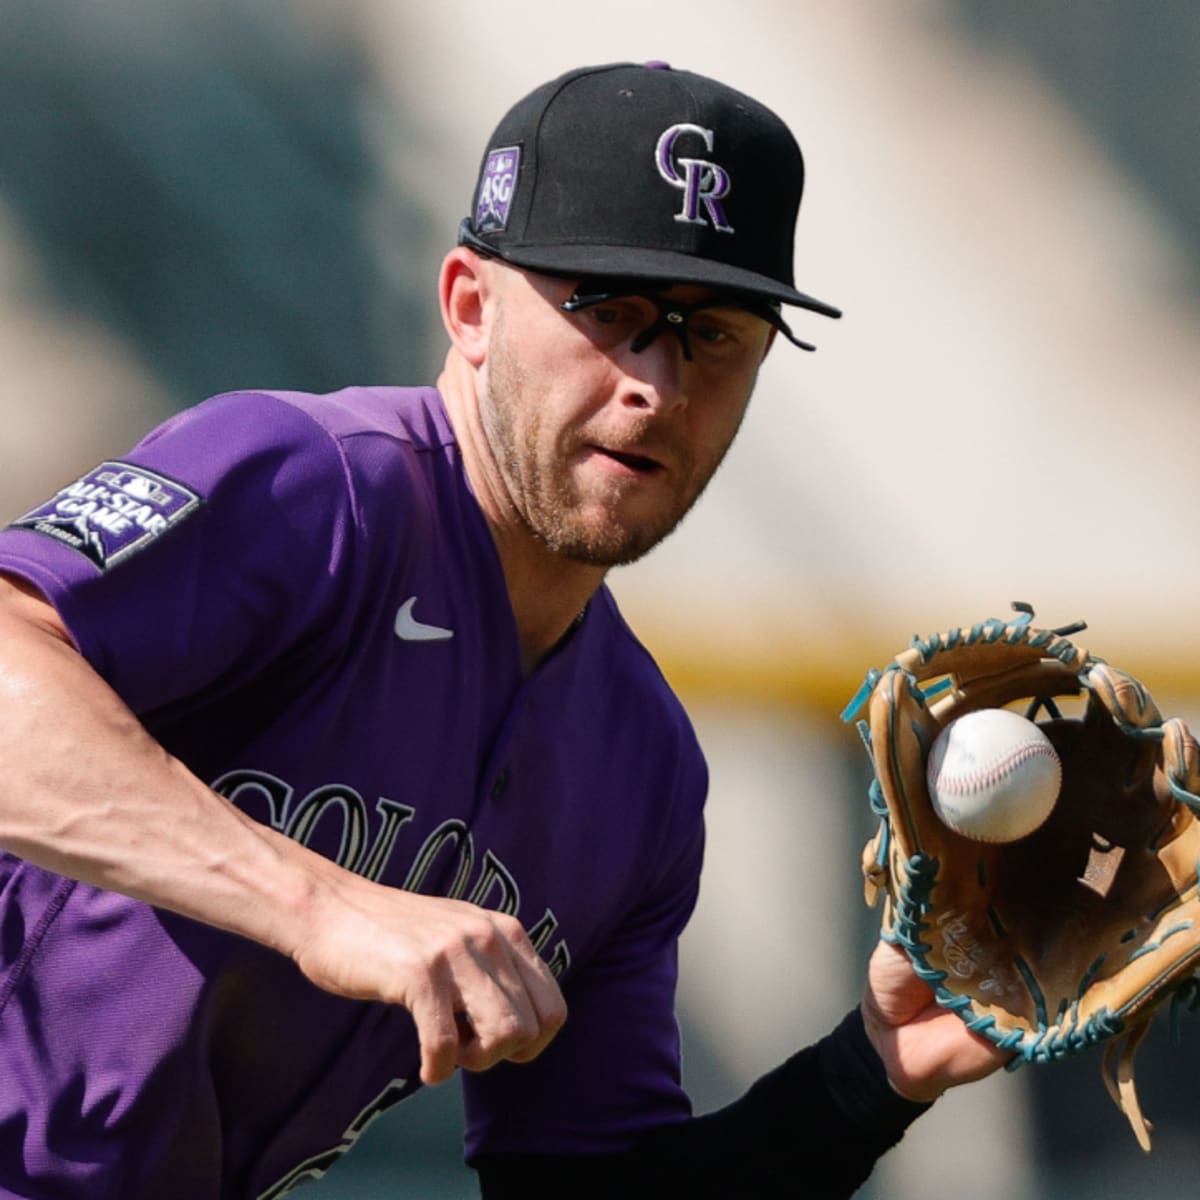 Boston Red Sox write new chapter by signing Trevor Story